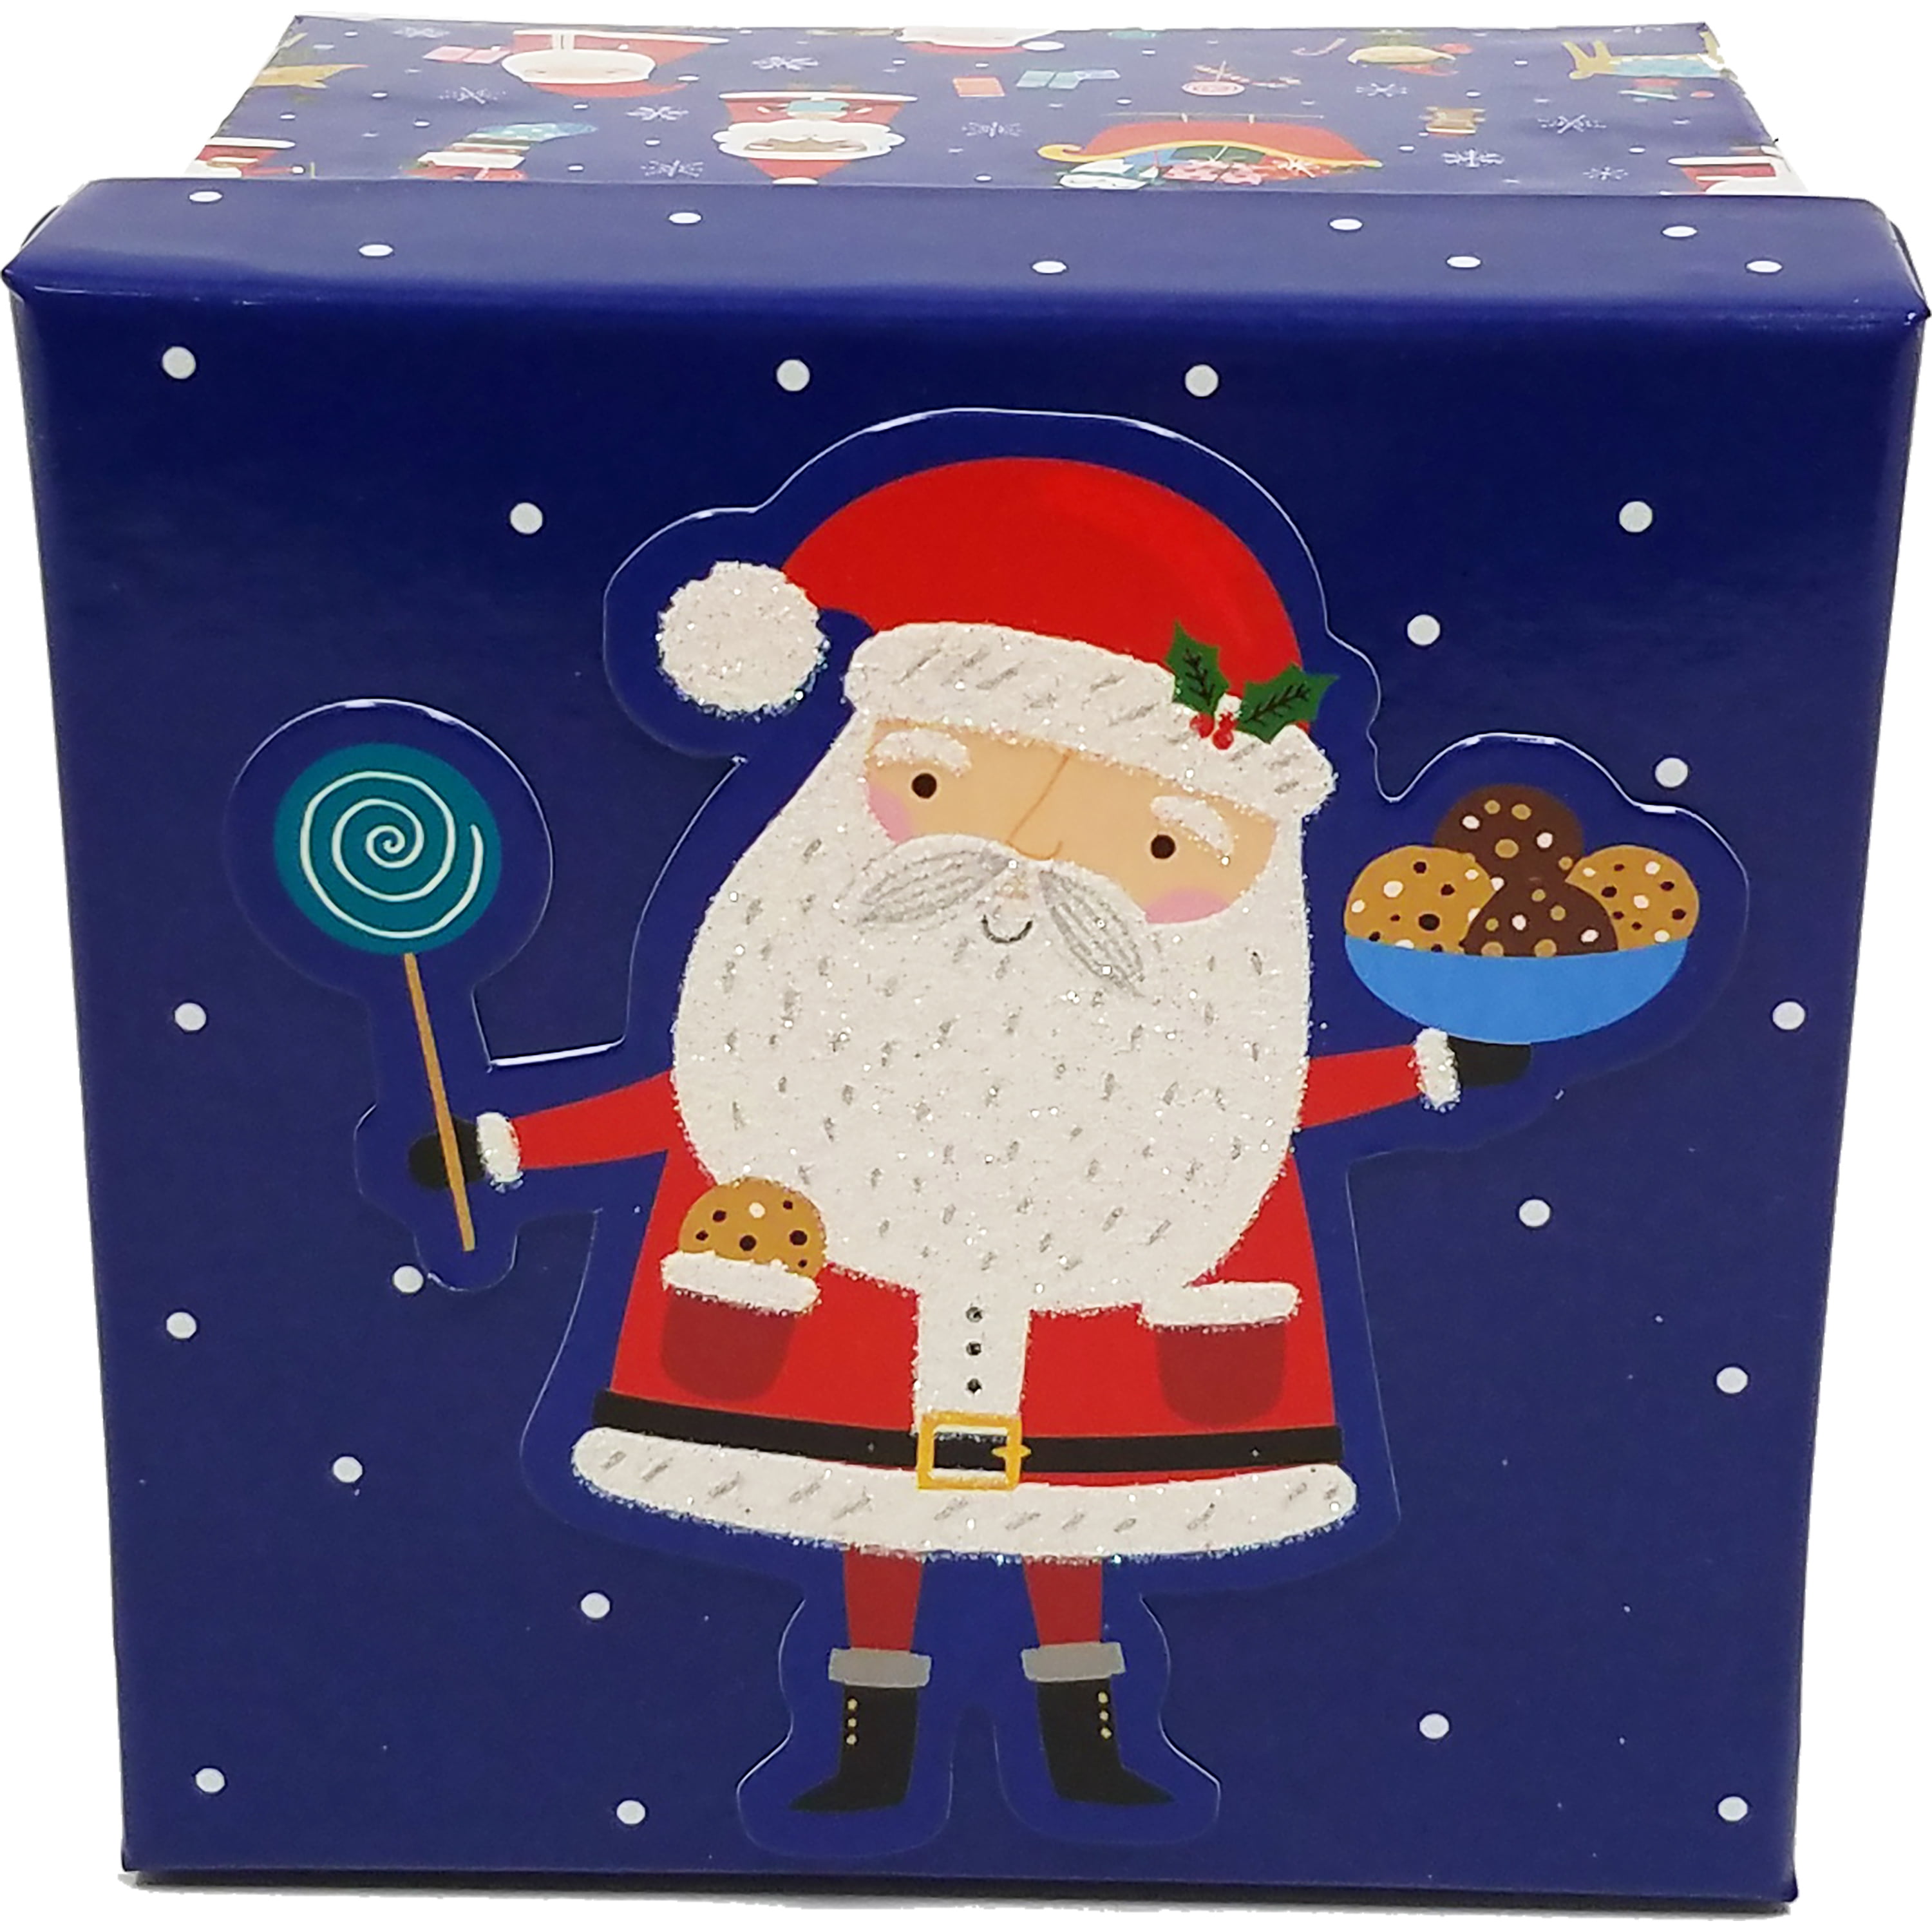 Holiday Time Small Square Glitter Christmas Gift Box, 4" x 4" x 3", Blue and Red Santa